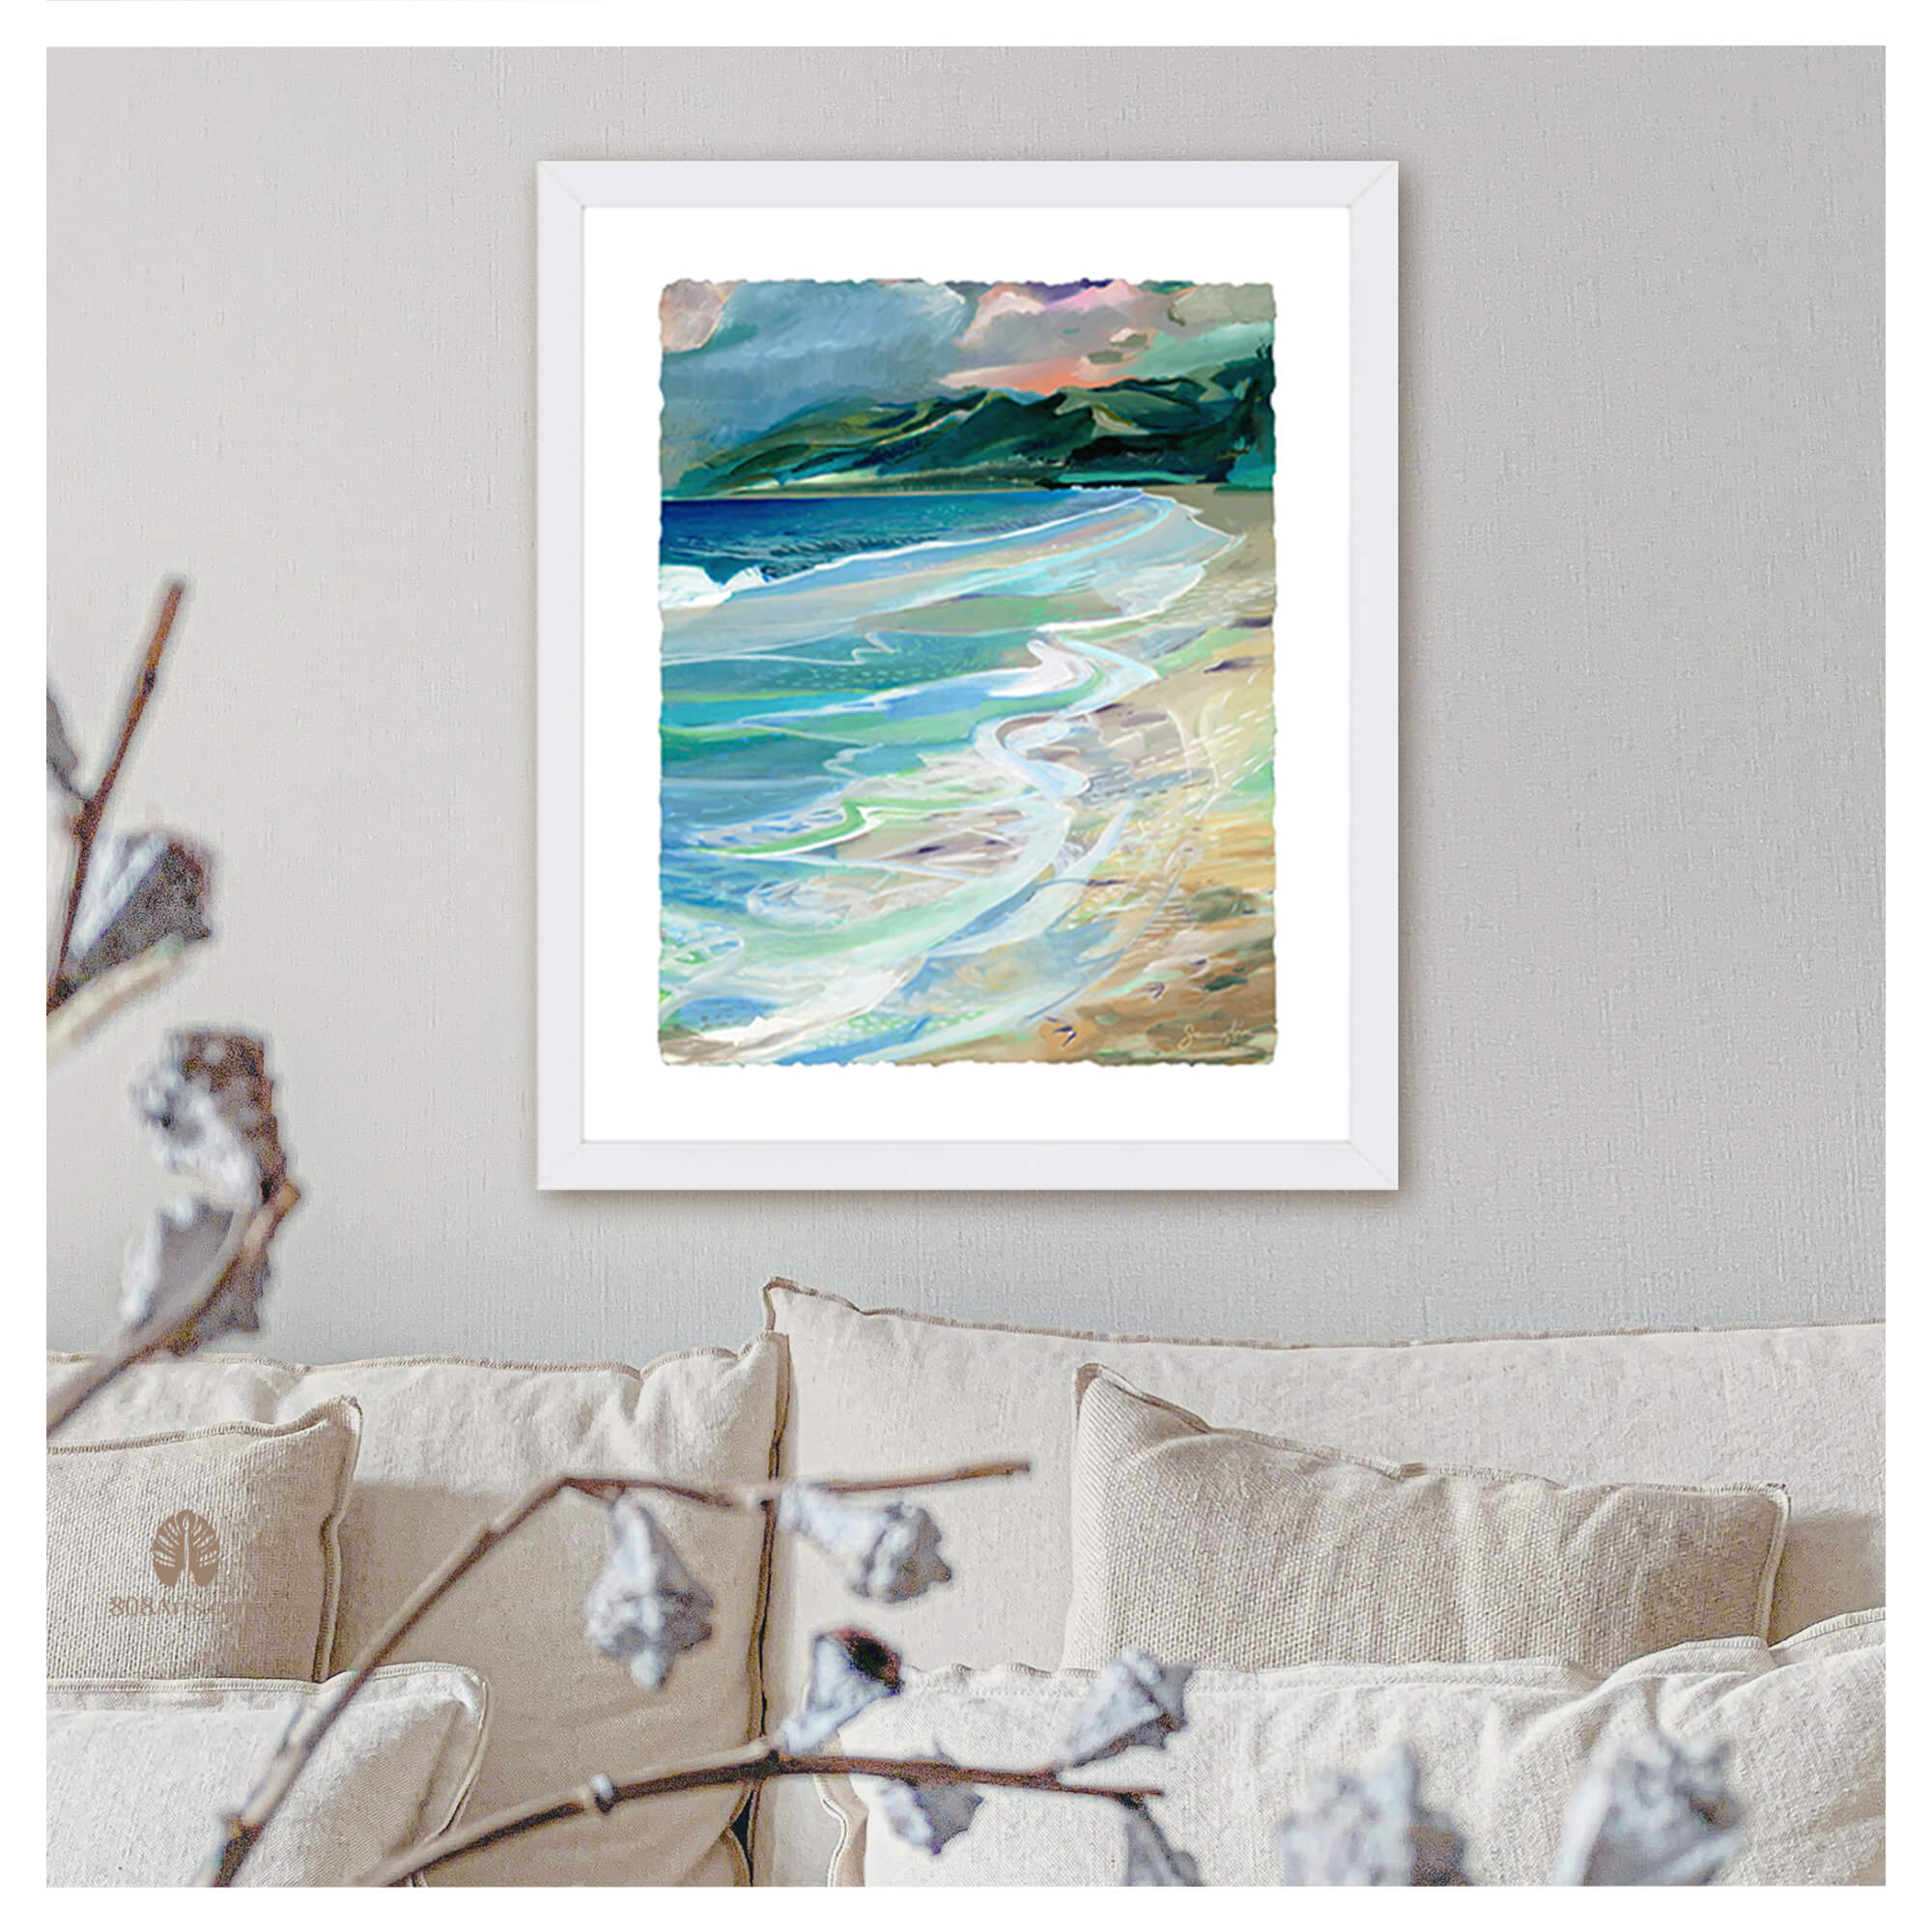 A framed watercolor paper giclée print featuring a beautiful abstract landscape with crashing waves and distant mountains by popular Hawaii artist Saumolia Puapuaga